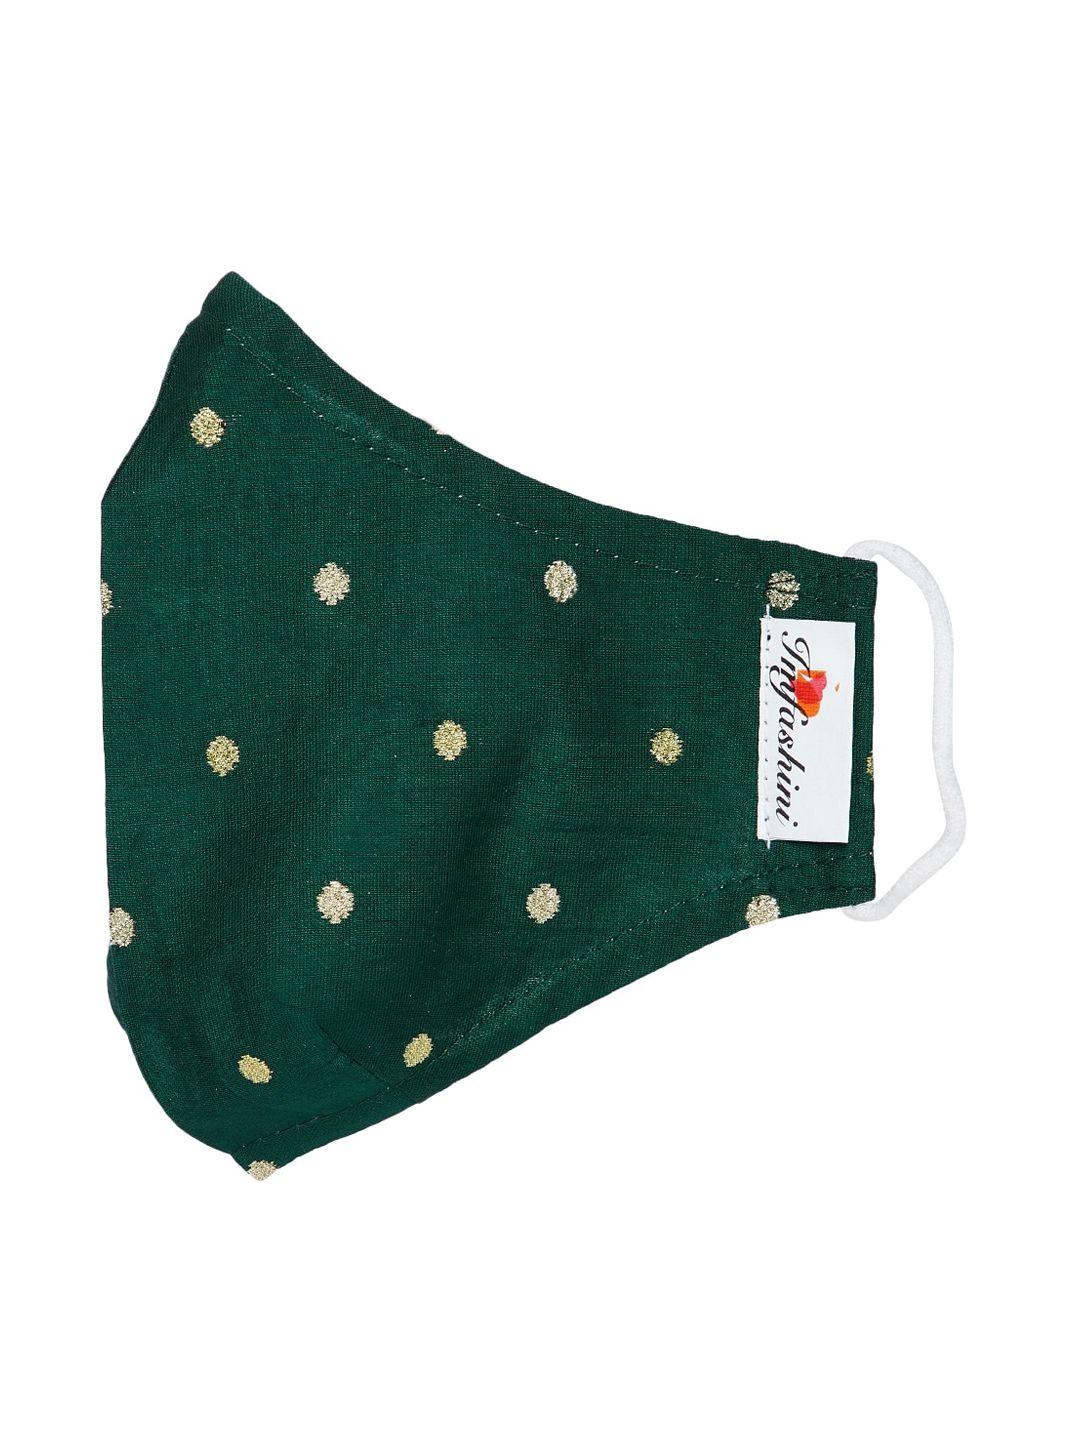 Imfashini Women Green & Gold-Coloured Embroidered 2-Ply Reusable Cloth Mask Price in India